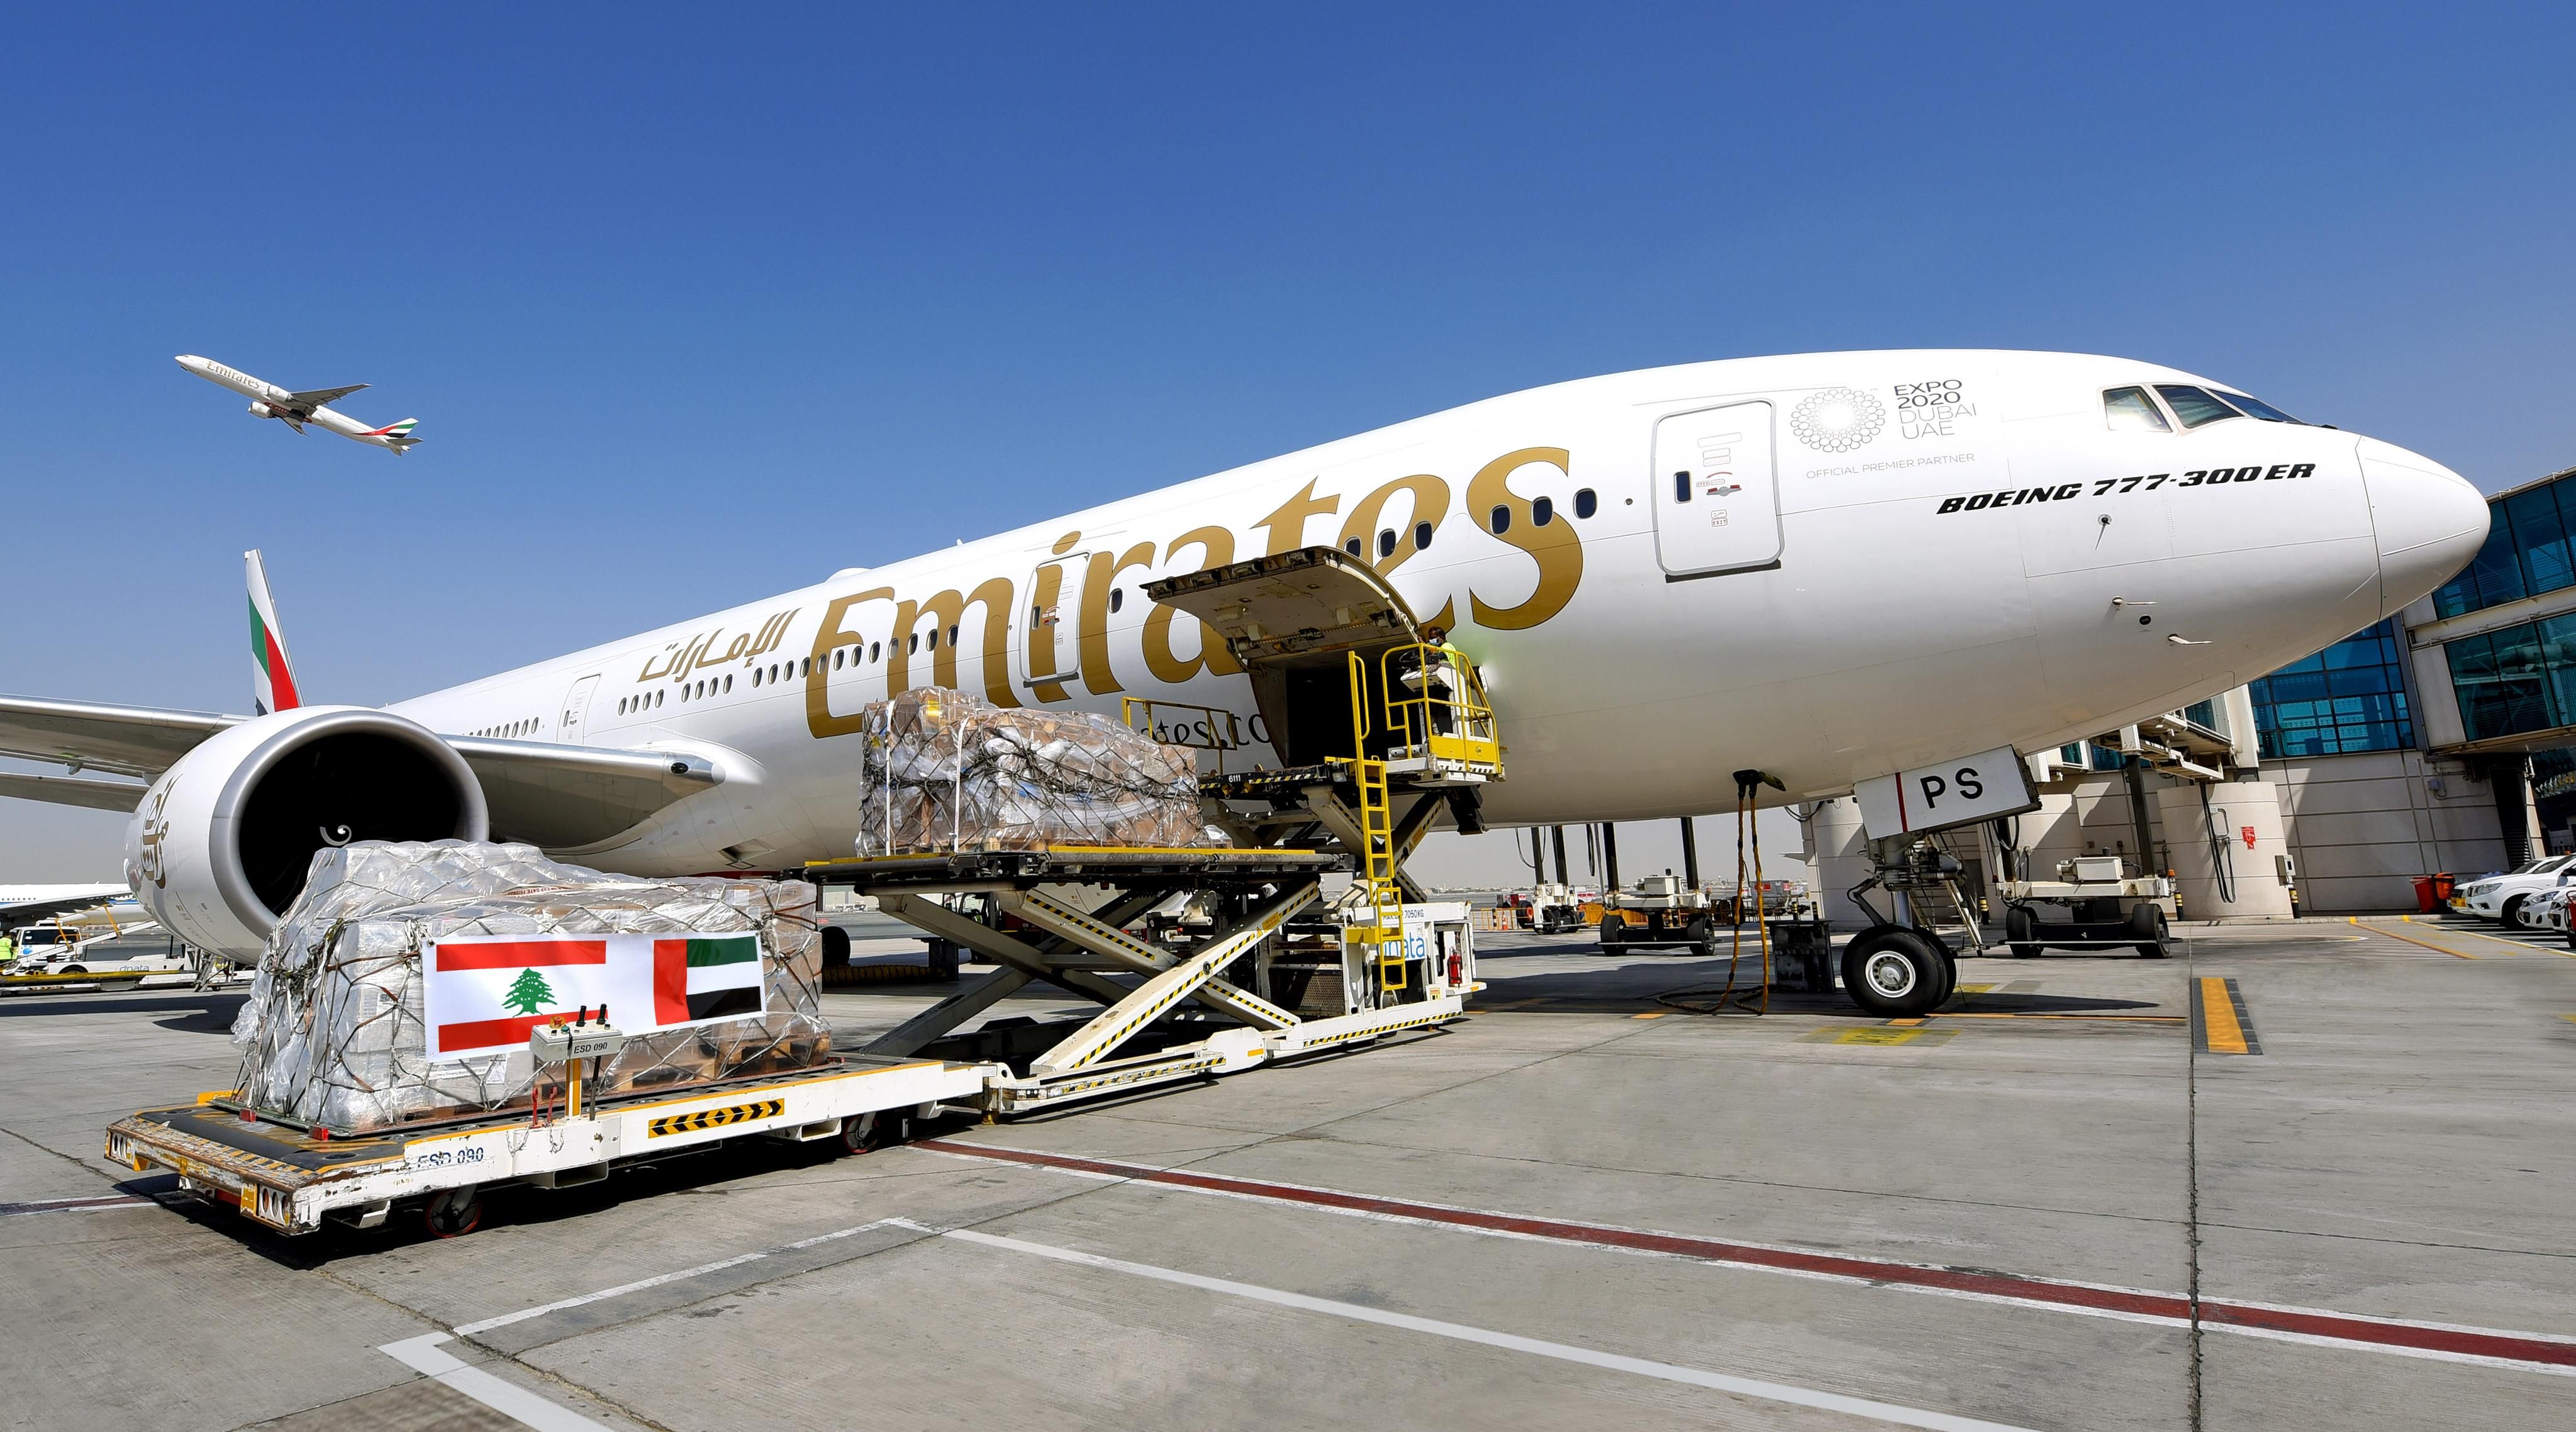 Emirates SkyCargo continues Beirut relief efforts, flying over 160,000 kgs of essential aid